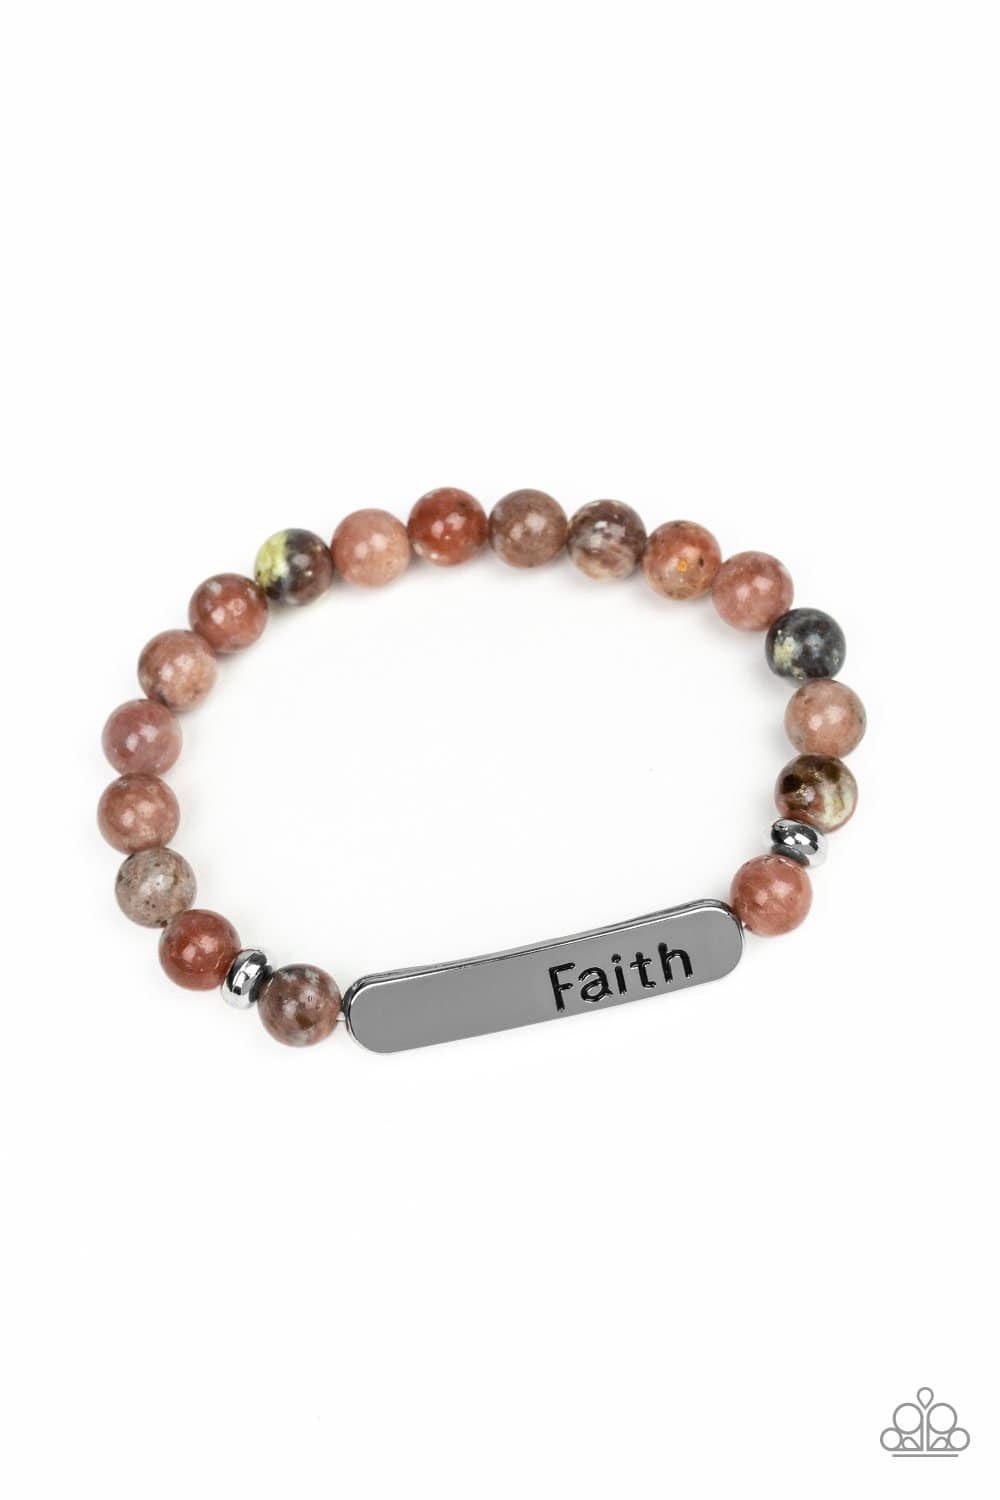 Faith In All Things - Multicolored Stretchy Faith Bracelet - Paparazzi Accessories - GlaMarous Titi Jewels